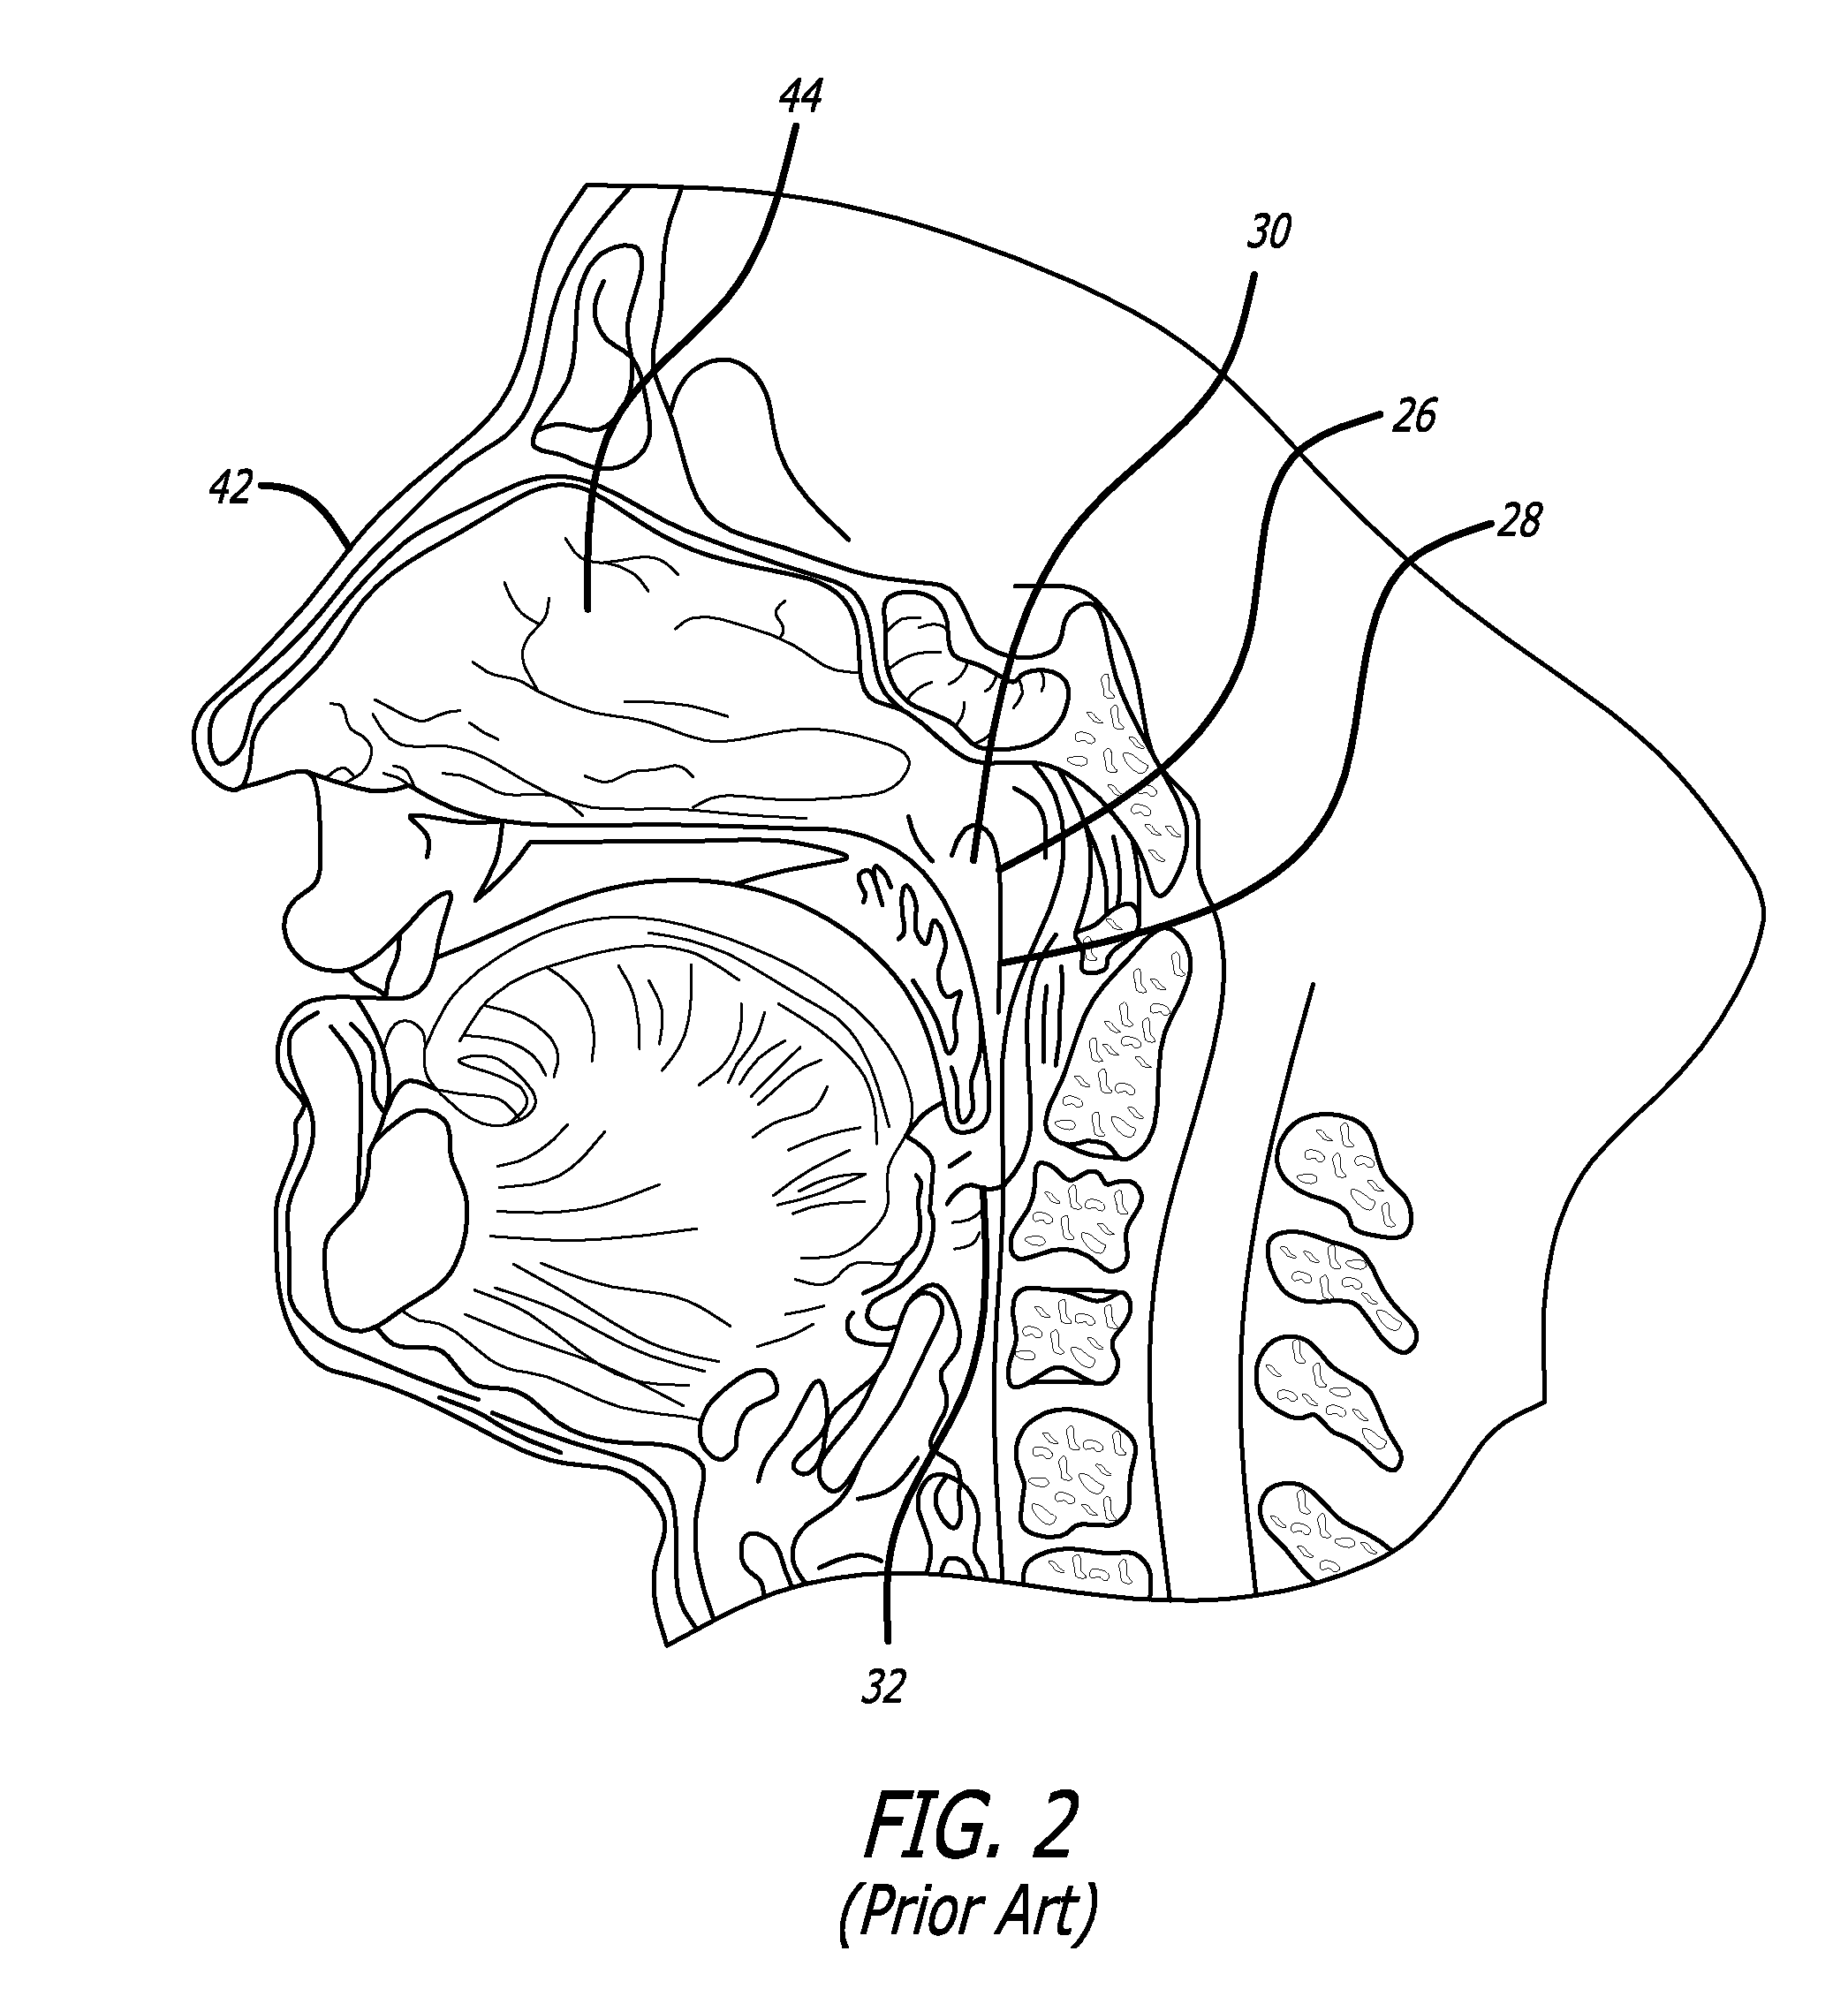 System and Method For Treatment of Non-Ventilating Middle Ear by Providing a Gas Pathway Through the Nasopharynx